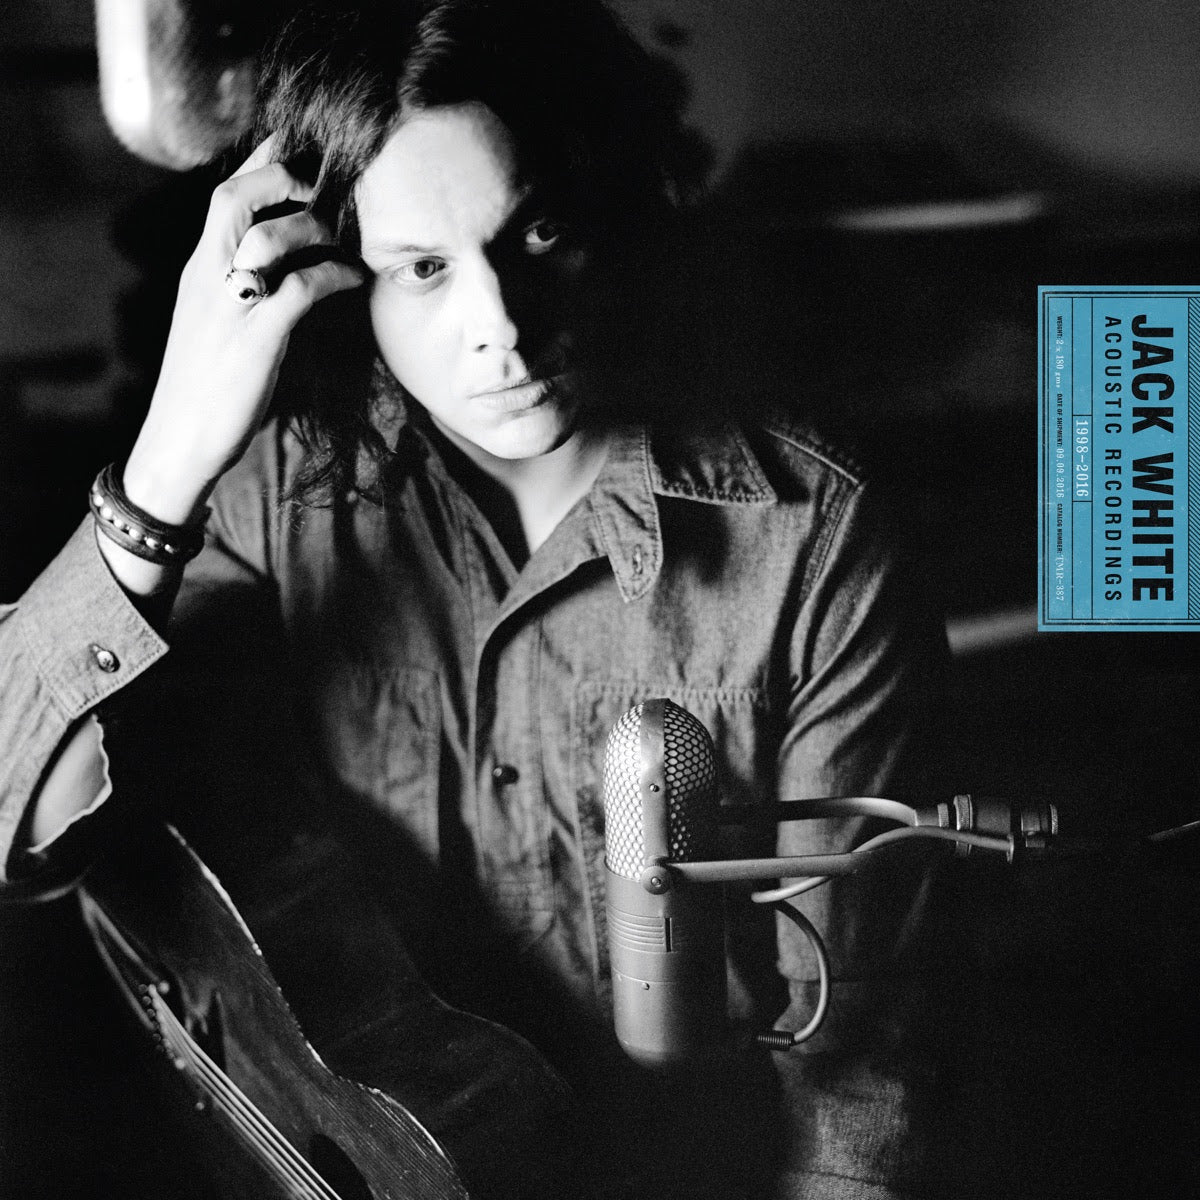 Jack White - Acoustic Recordings 1998-2016 | Buy the Vinyl LP from Flying Nun Records